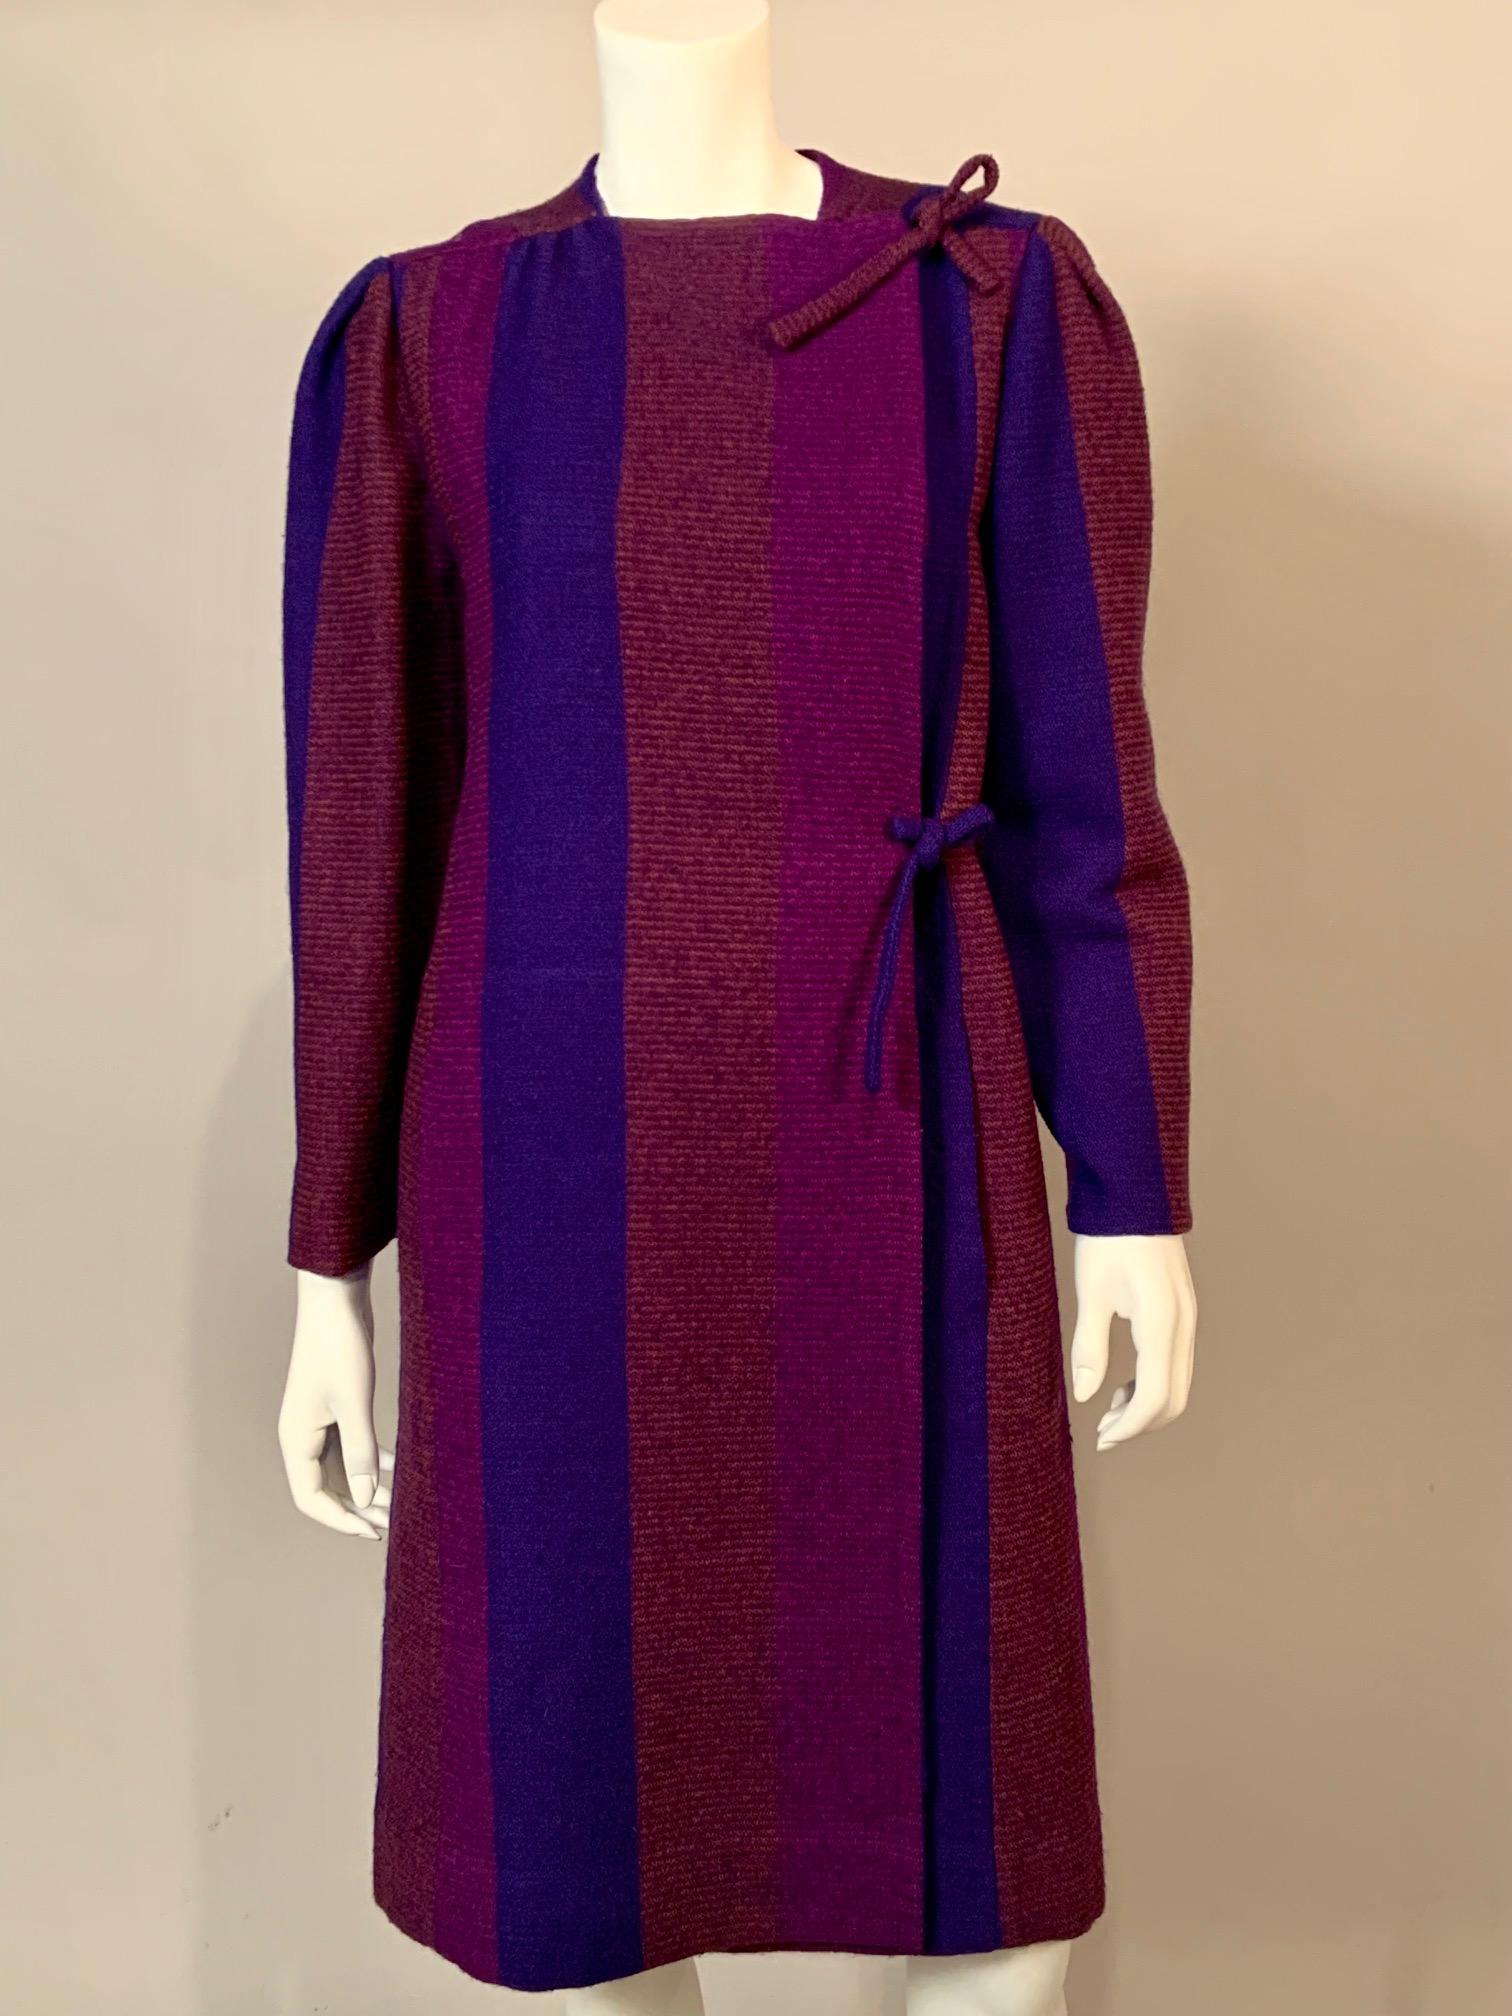 Pauline Trigere designed this outfit using a fantastic vertical striped wool in purple, electric blue and rust. The coat has one snap at the neckline and two wool ties on the left side. The wrap around skirt has hooks and eyes at the waist band and